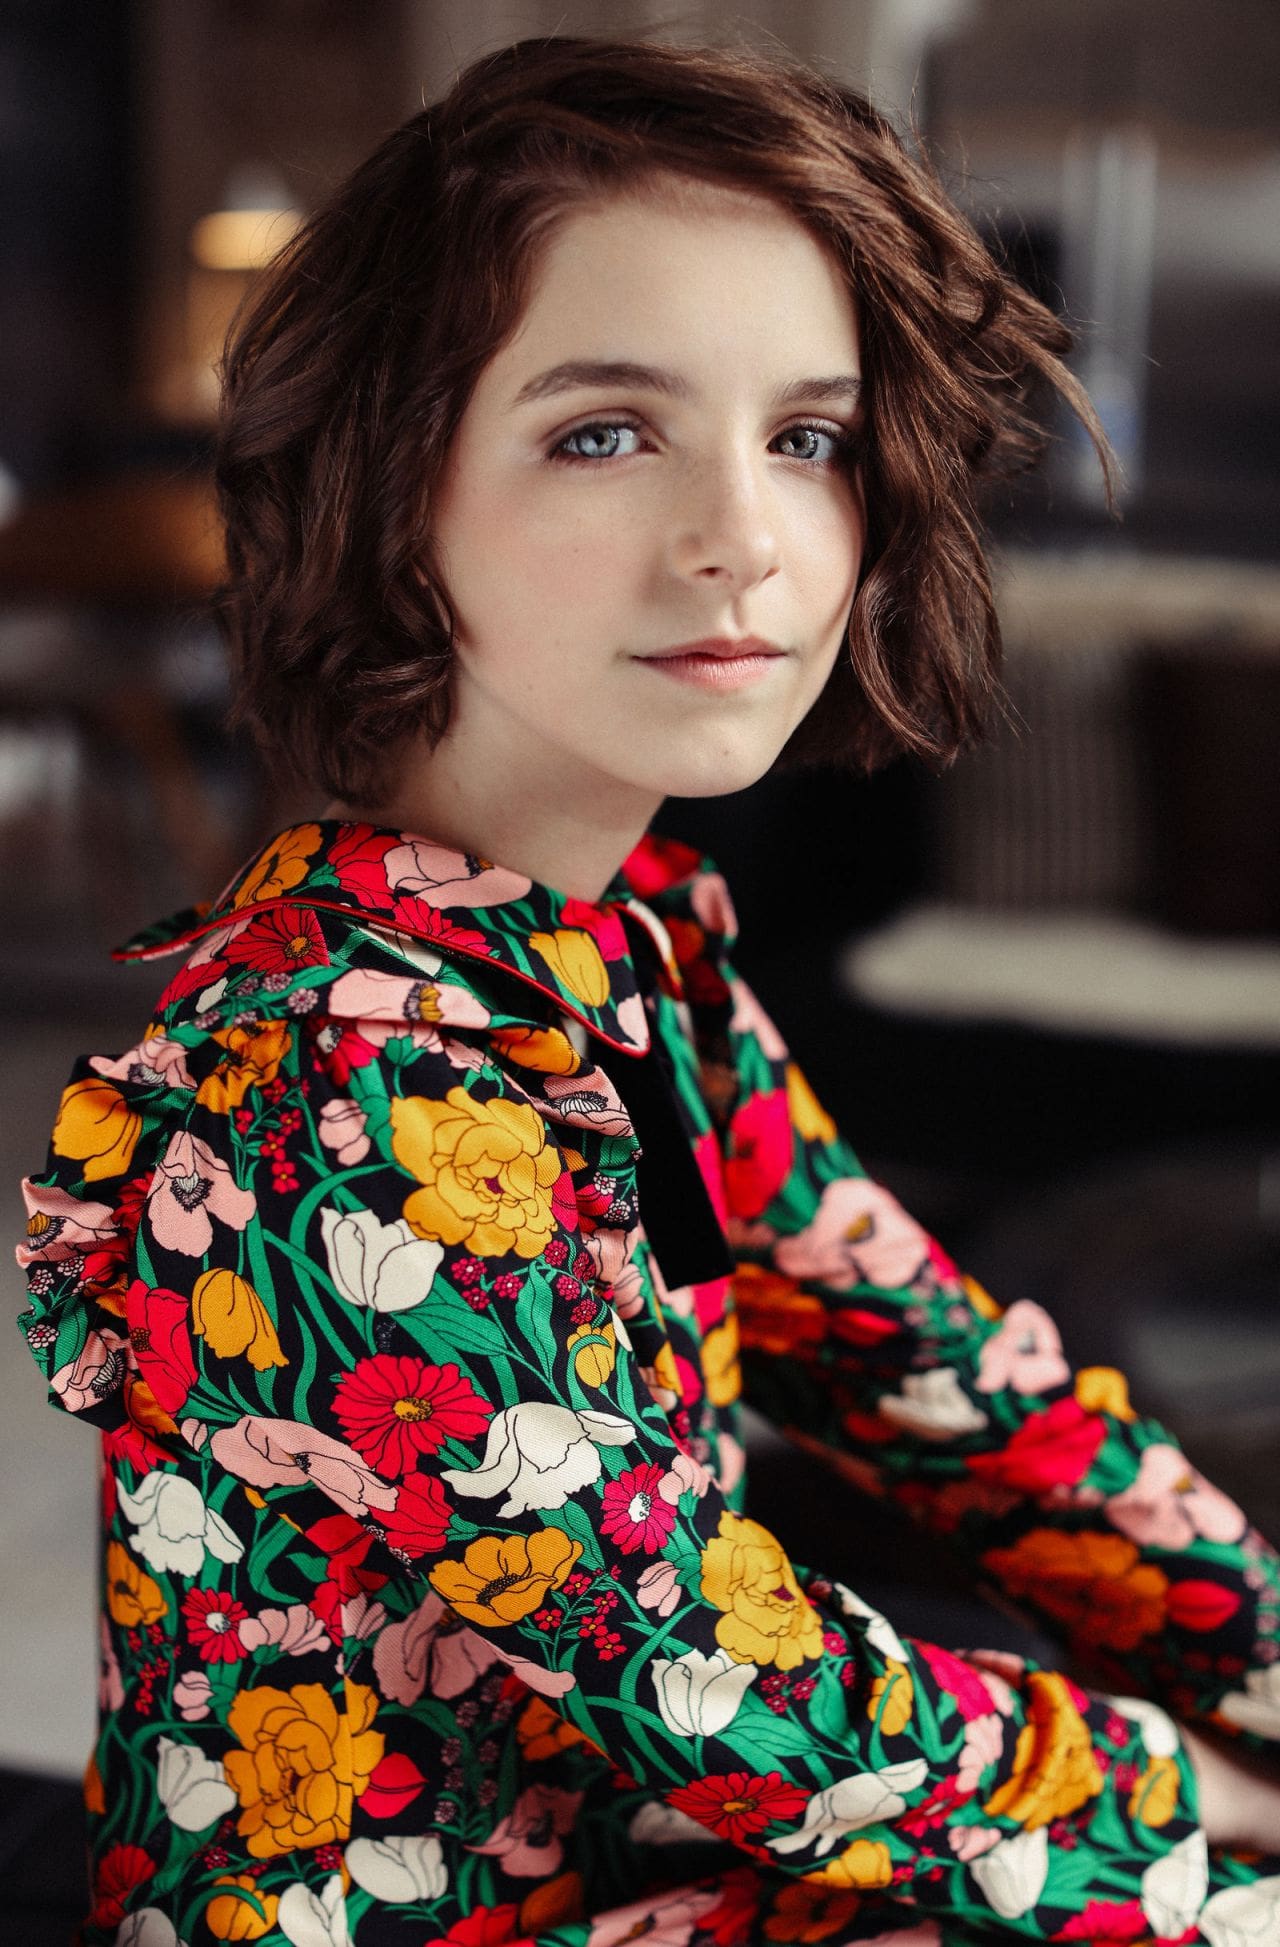 Mckenna Grace Sexy Wallpapers